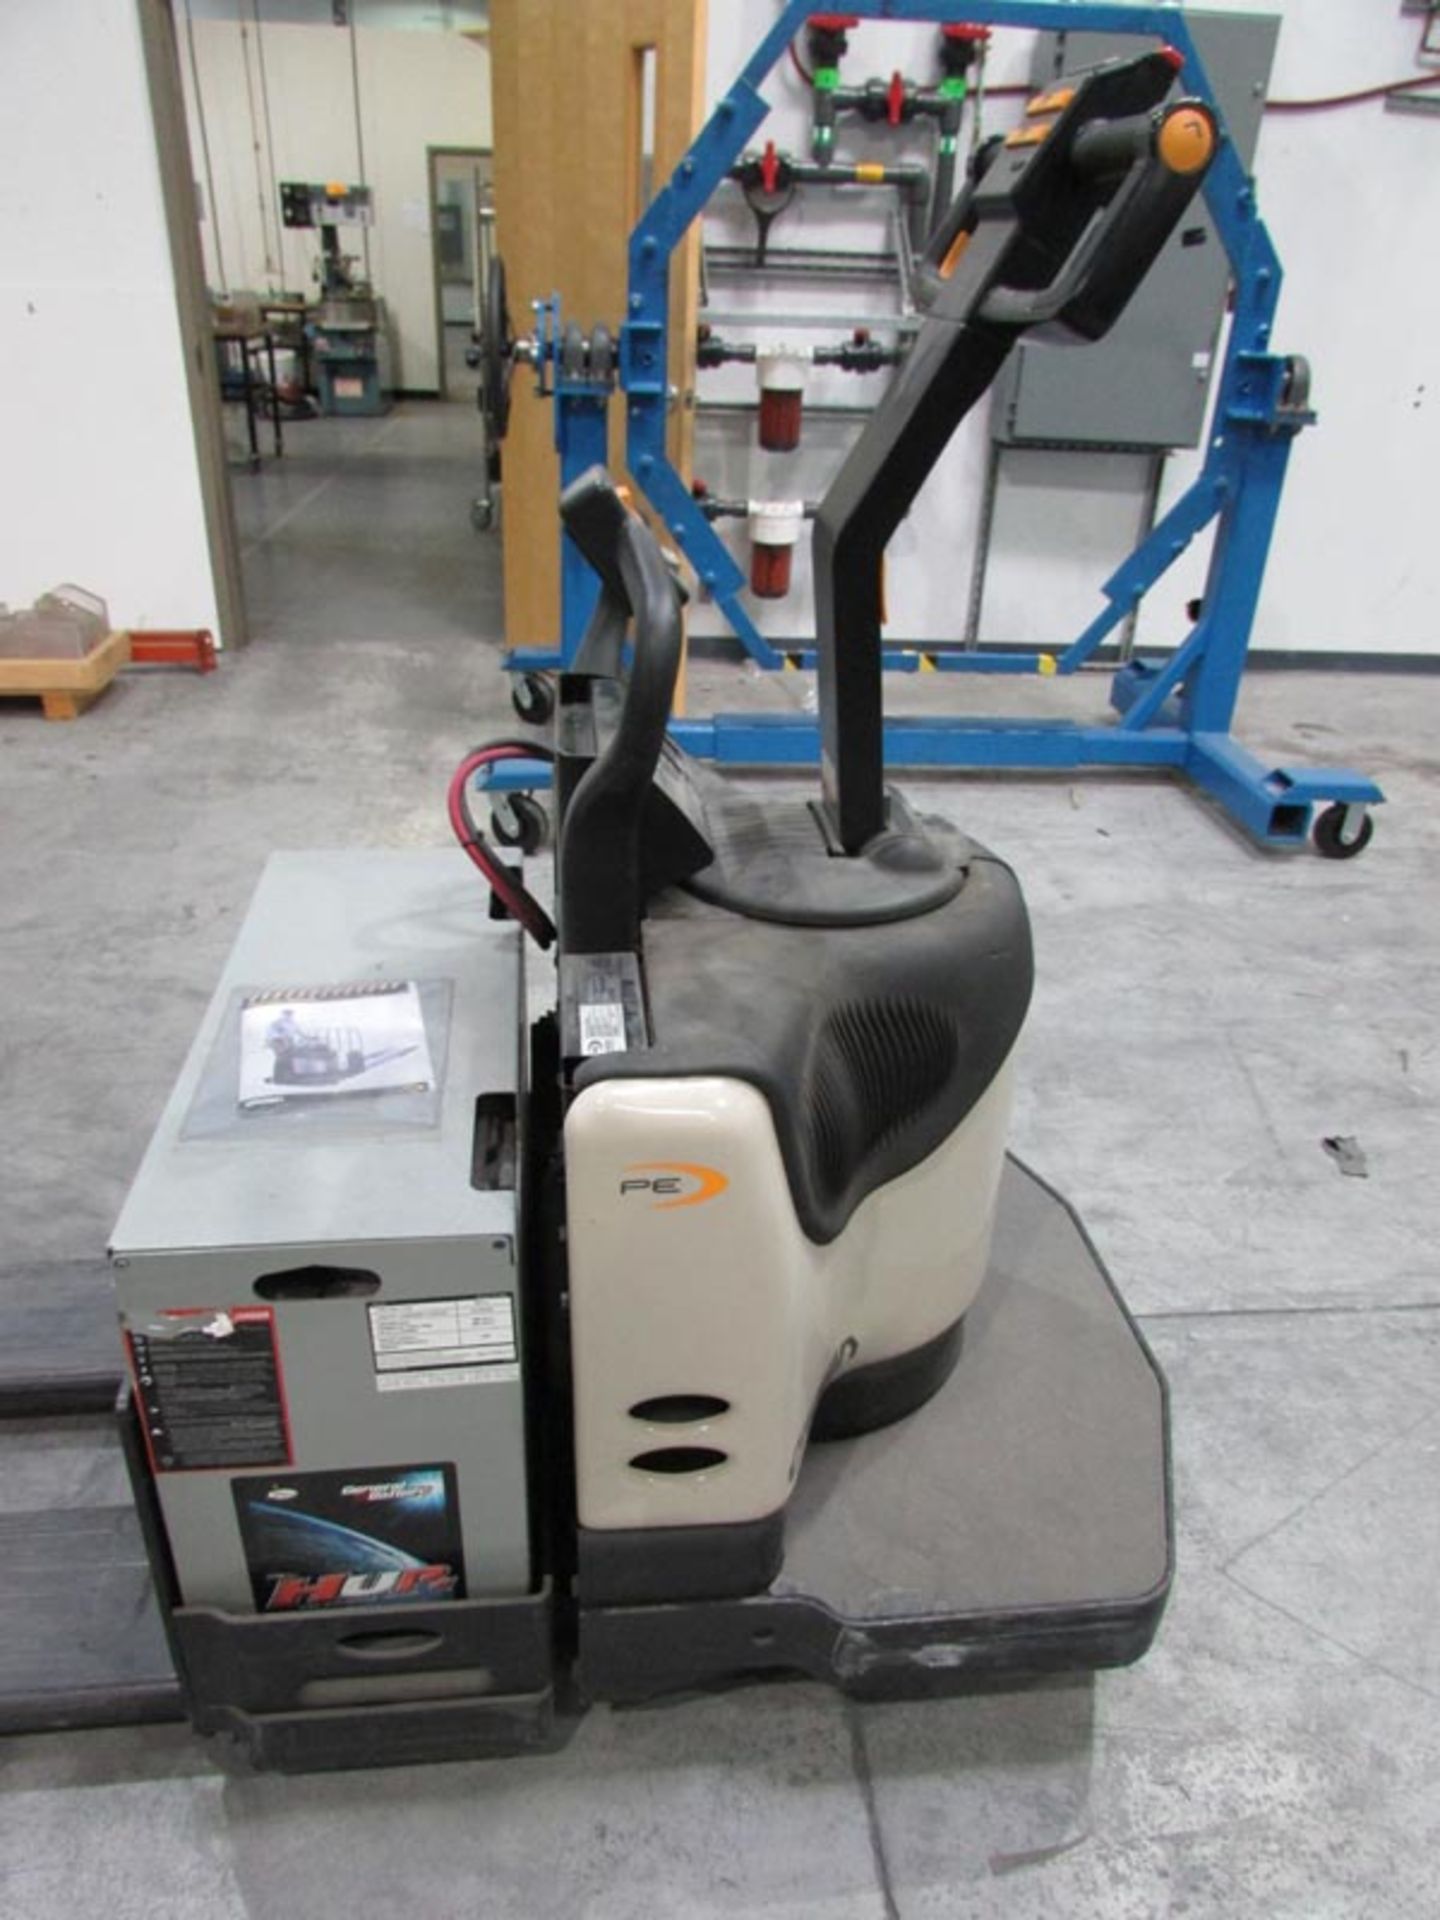 Crown Mdl: PE4500-80 24V Electric Pallet Jack 8,000Lbs Cap, 840Lbs Truck Weight, 1520Lbs Truck - Image 4 of 5